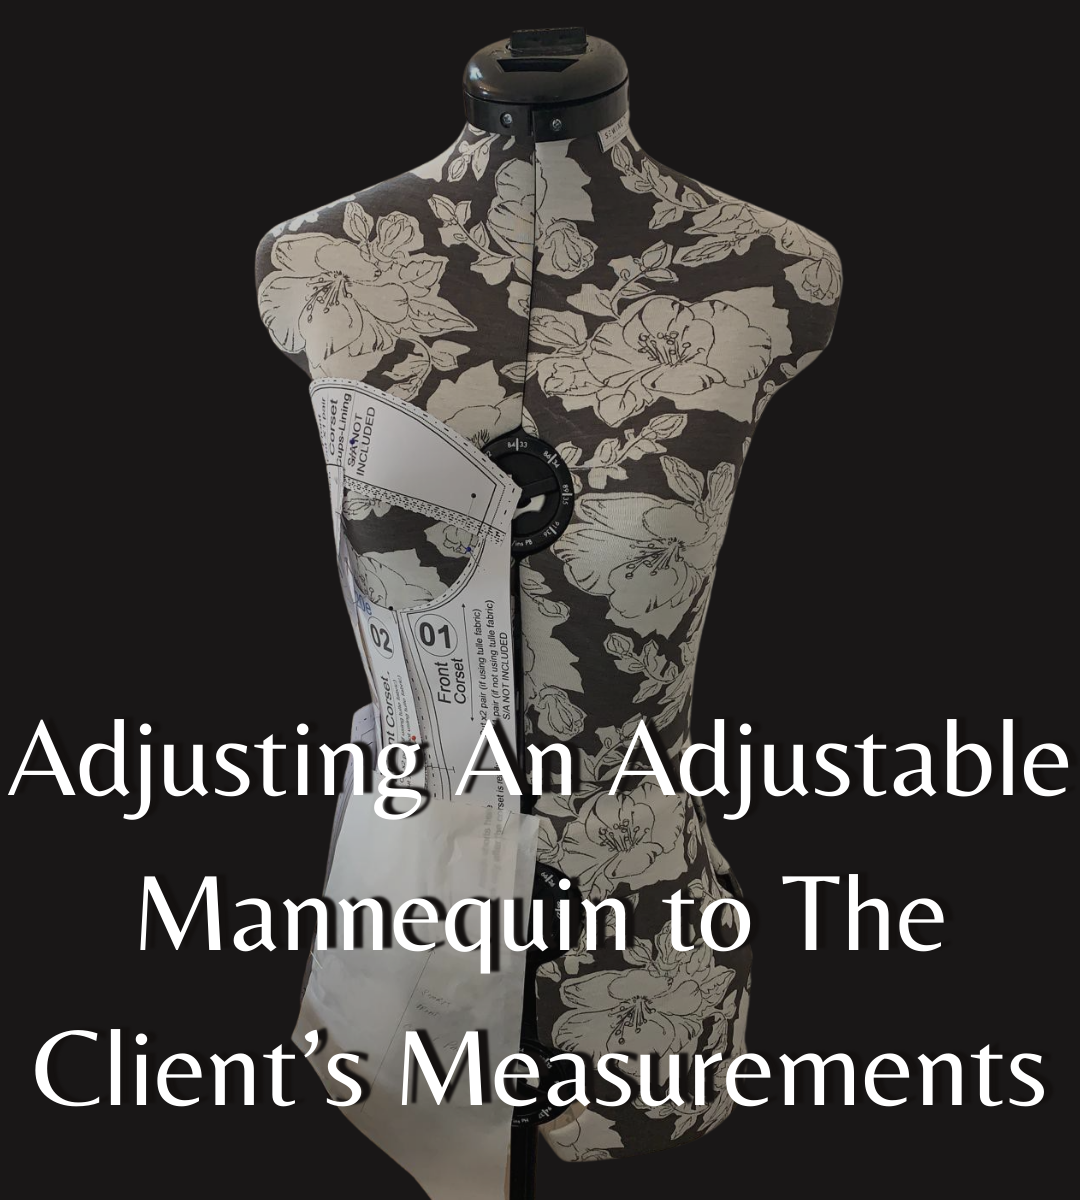 Adjusting An Adjustable Mannequin to The Client’s Measurements MASTERCLASS